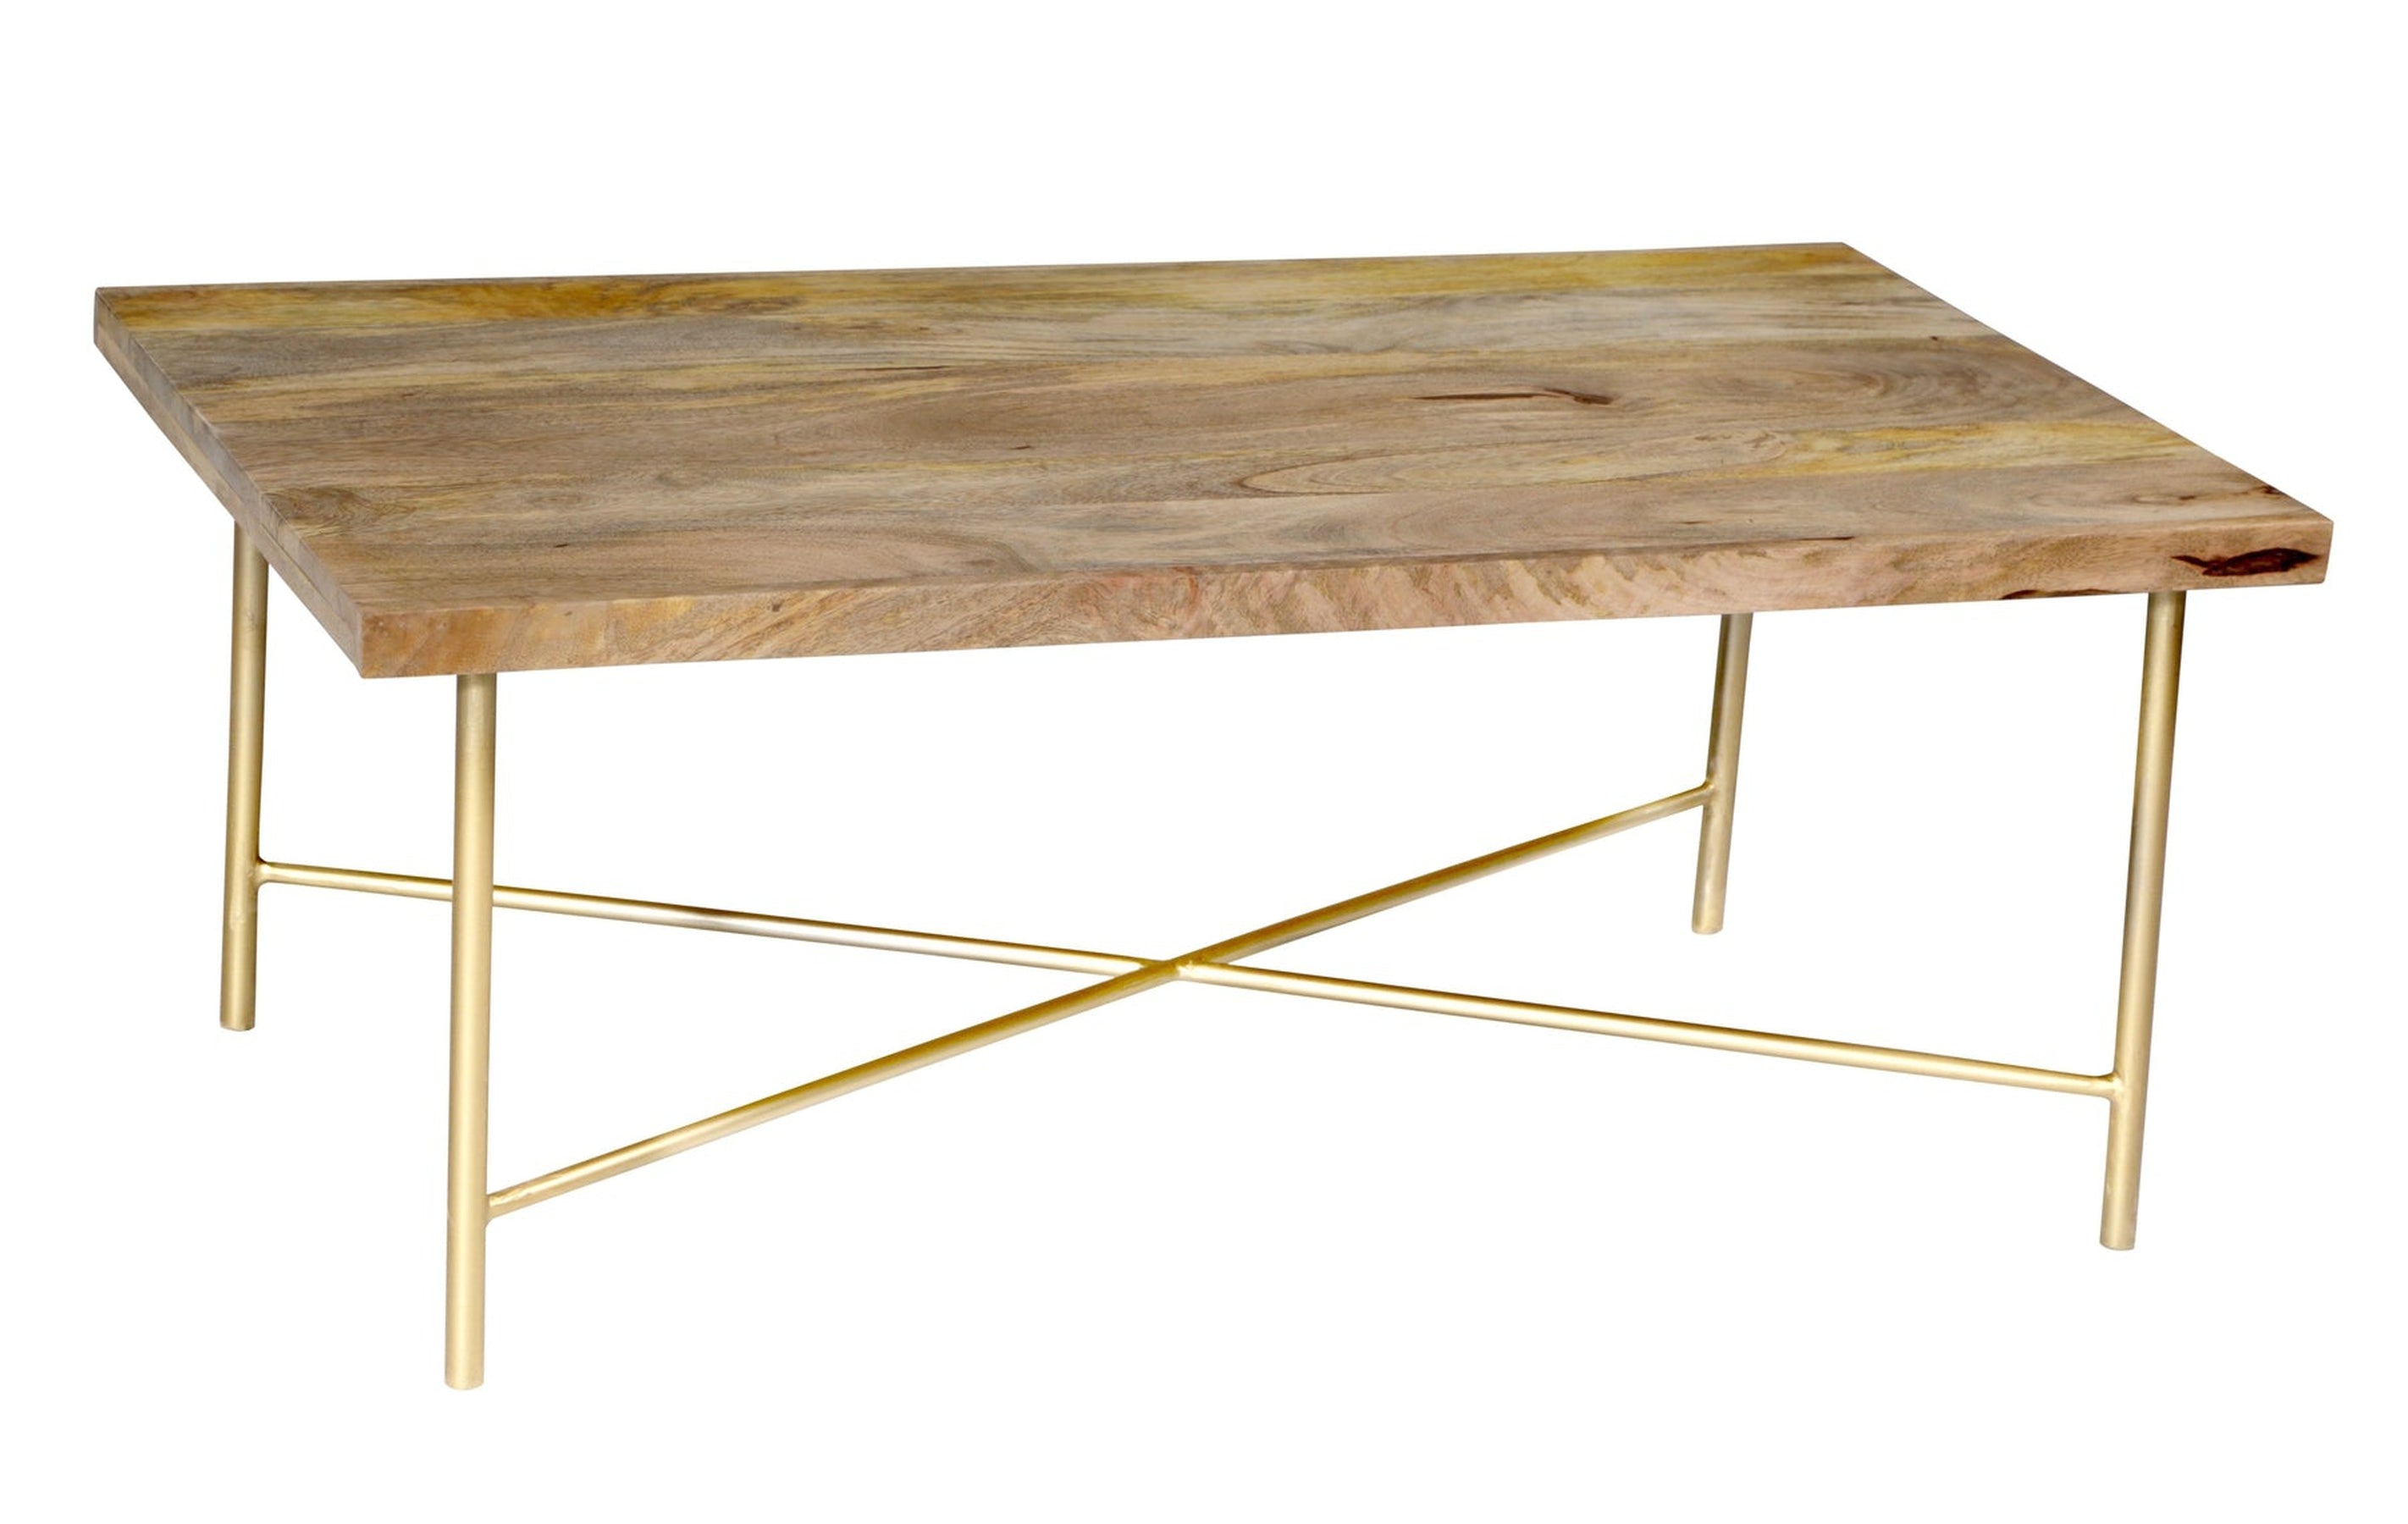 Wooden Ring Range Solid Wood Coffee Table - Accent Look With Brass Legs | 100x55x40 cm